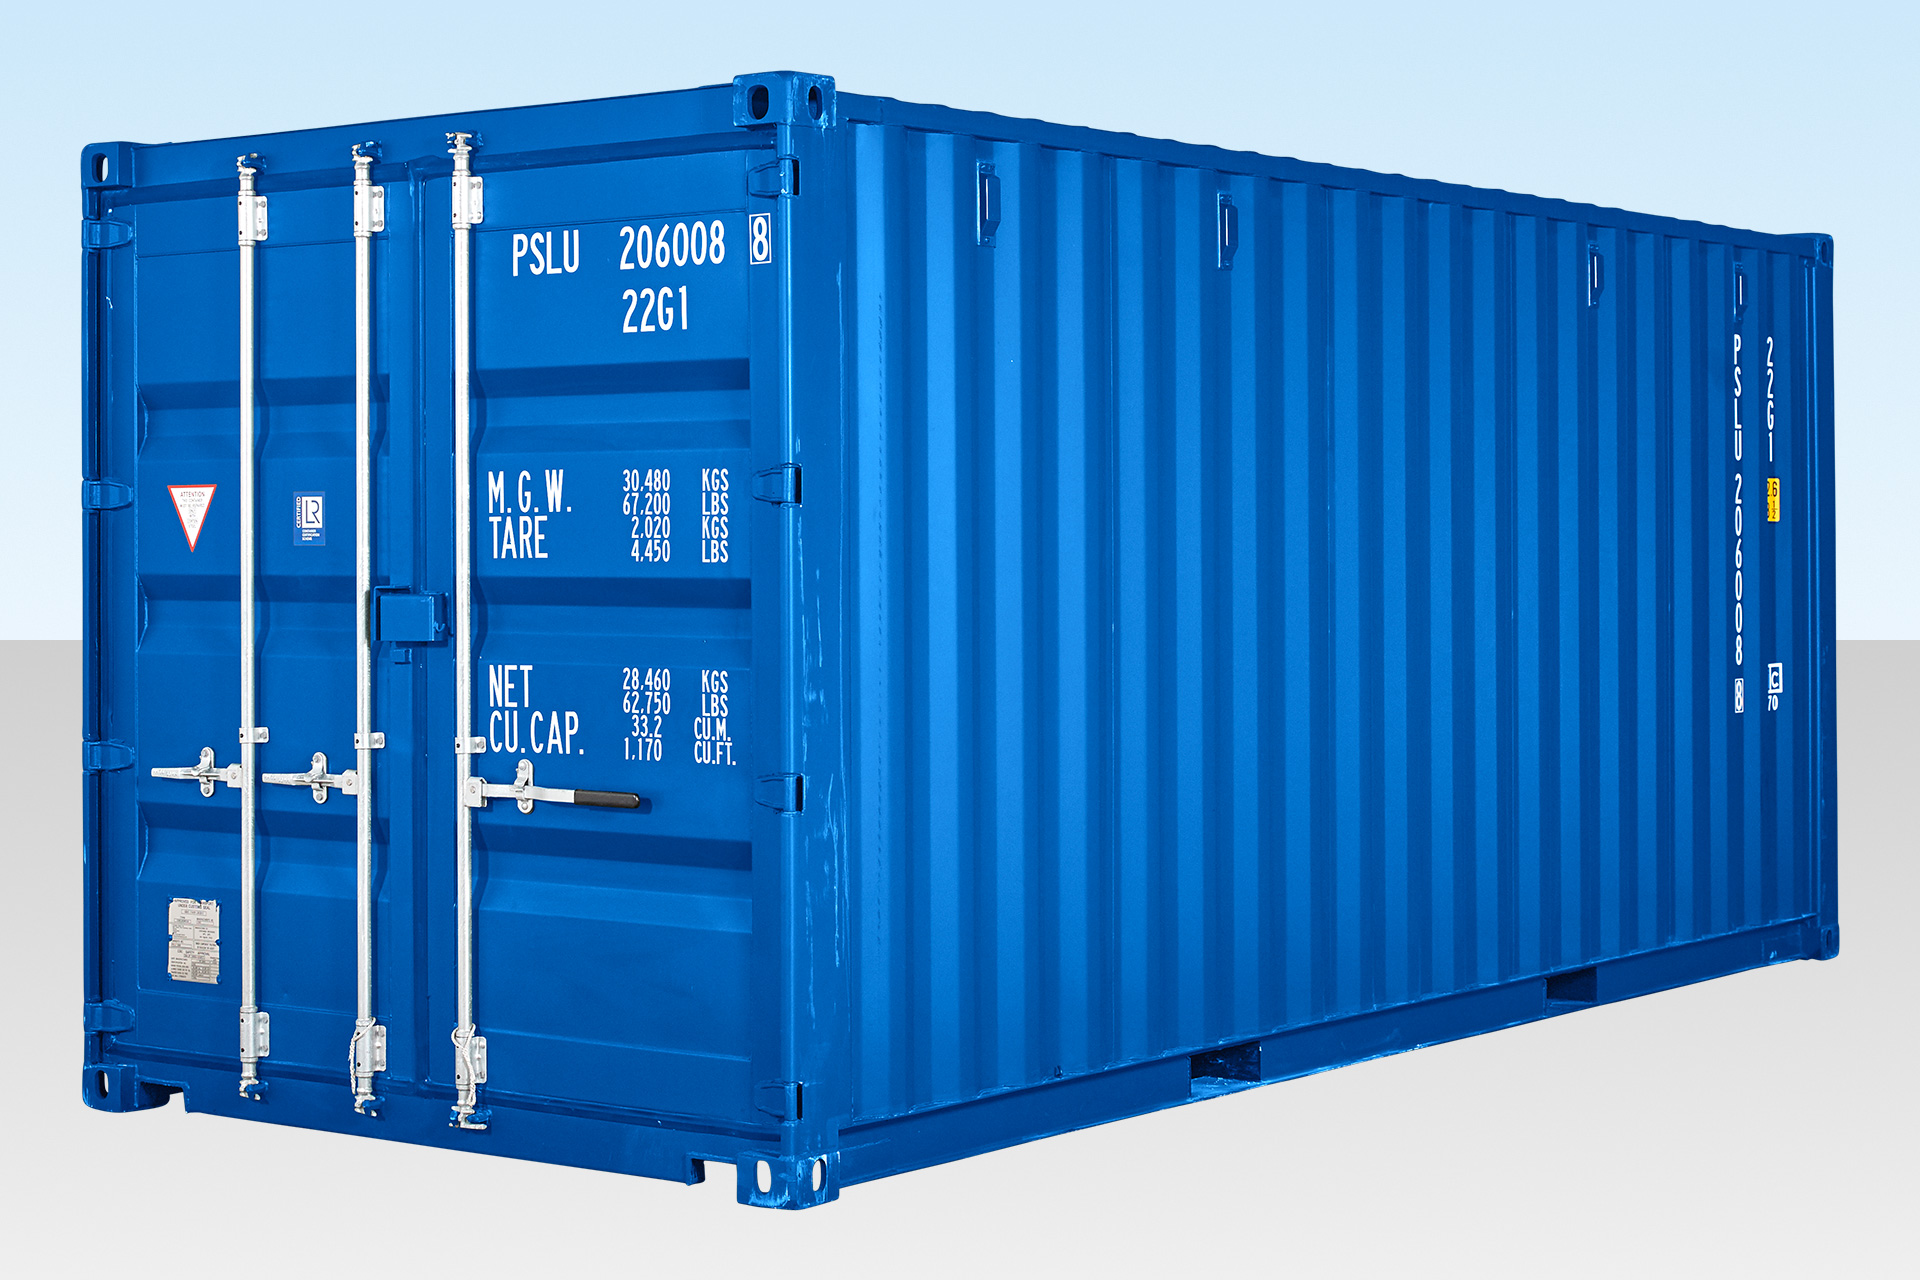 https://www.portablespace.co.uk/wp-content/uploads/2018/08/620-sale-20ft-std-one-trip-container-ral5010-correct-1.jpg